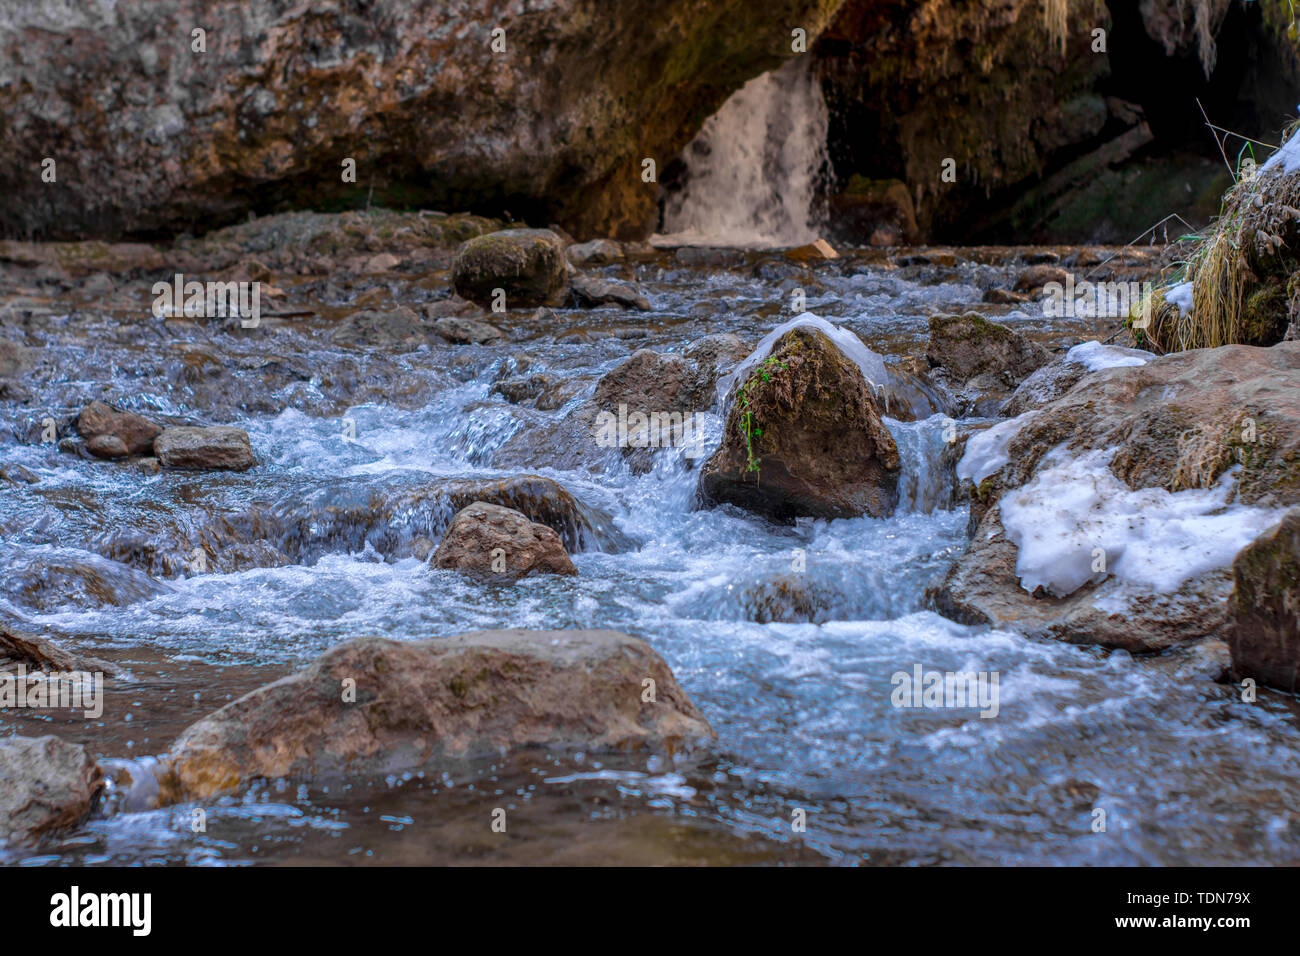 Cold mountain river flows between stones with snow and ice, selective focus, waterfall in the background, Karachay-Cherkess Republic. Stock Photo